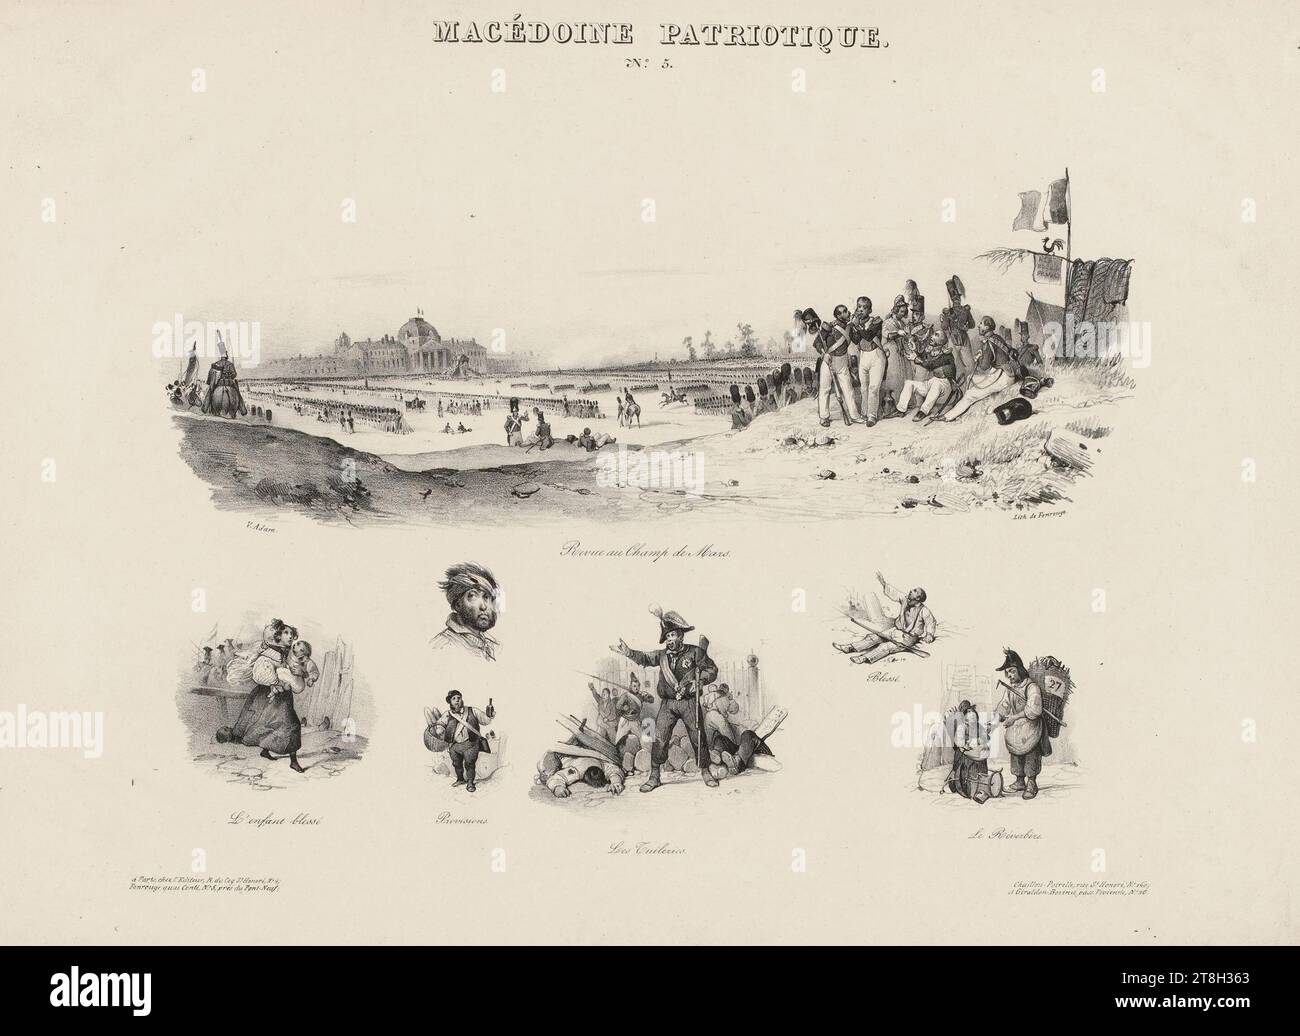 PATRIOTIC MACEDONIA, N°5, Adam, Victor (Jean-Victor Adam, known as), Draftsman-lithographer, Fonrouge, Antoine Adolphe Catherine, Printer-lithographer, The Publisher, Fonrouge, Antoine Adolphe Catherine, Publisher, Chaillou-Potrelle, Publisher, Giraldon-Bovinet, Publisher, In 1830, Print, Graphic Arts, Print, Lithography, Paris, Paris, Paris, Paris, Dimensions - Work: Height: 31. 7 cm, Width: 46.7 cm, Dimensions - Mounting:, Height: 32.3cm, Width: 49cm Stock Photo